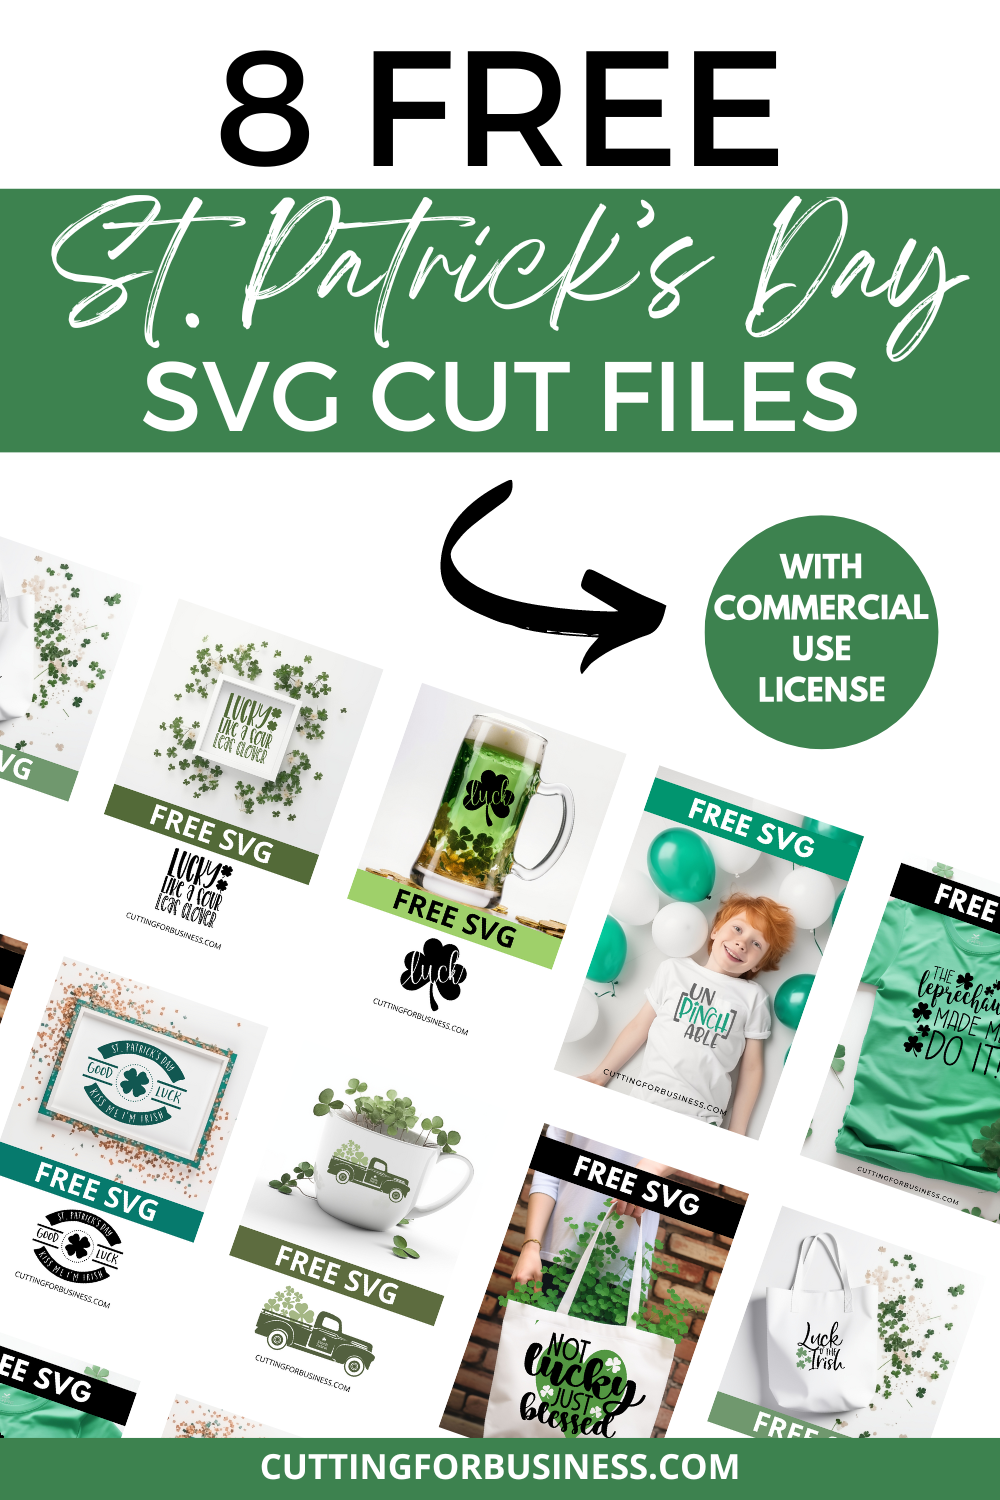 8 Free St. Patrick's Day SVGs - cuttingforbusiness.com